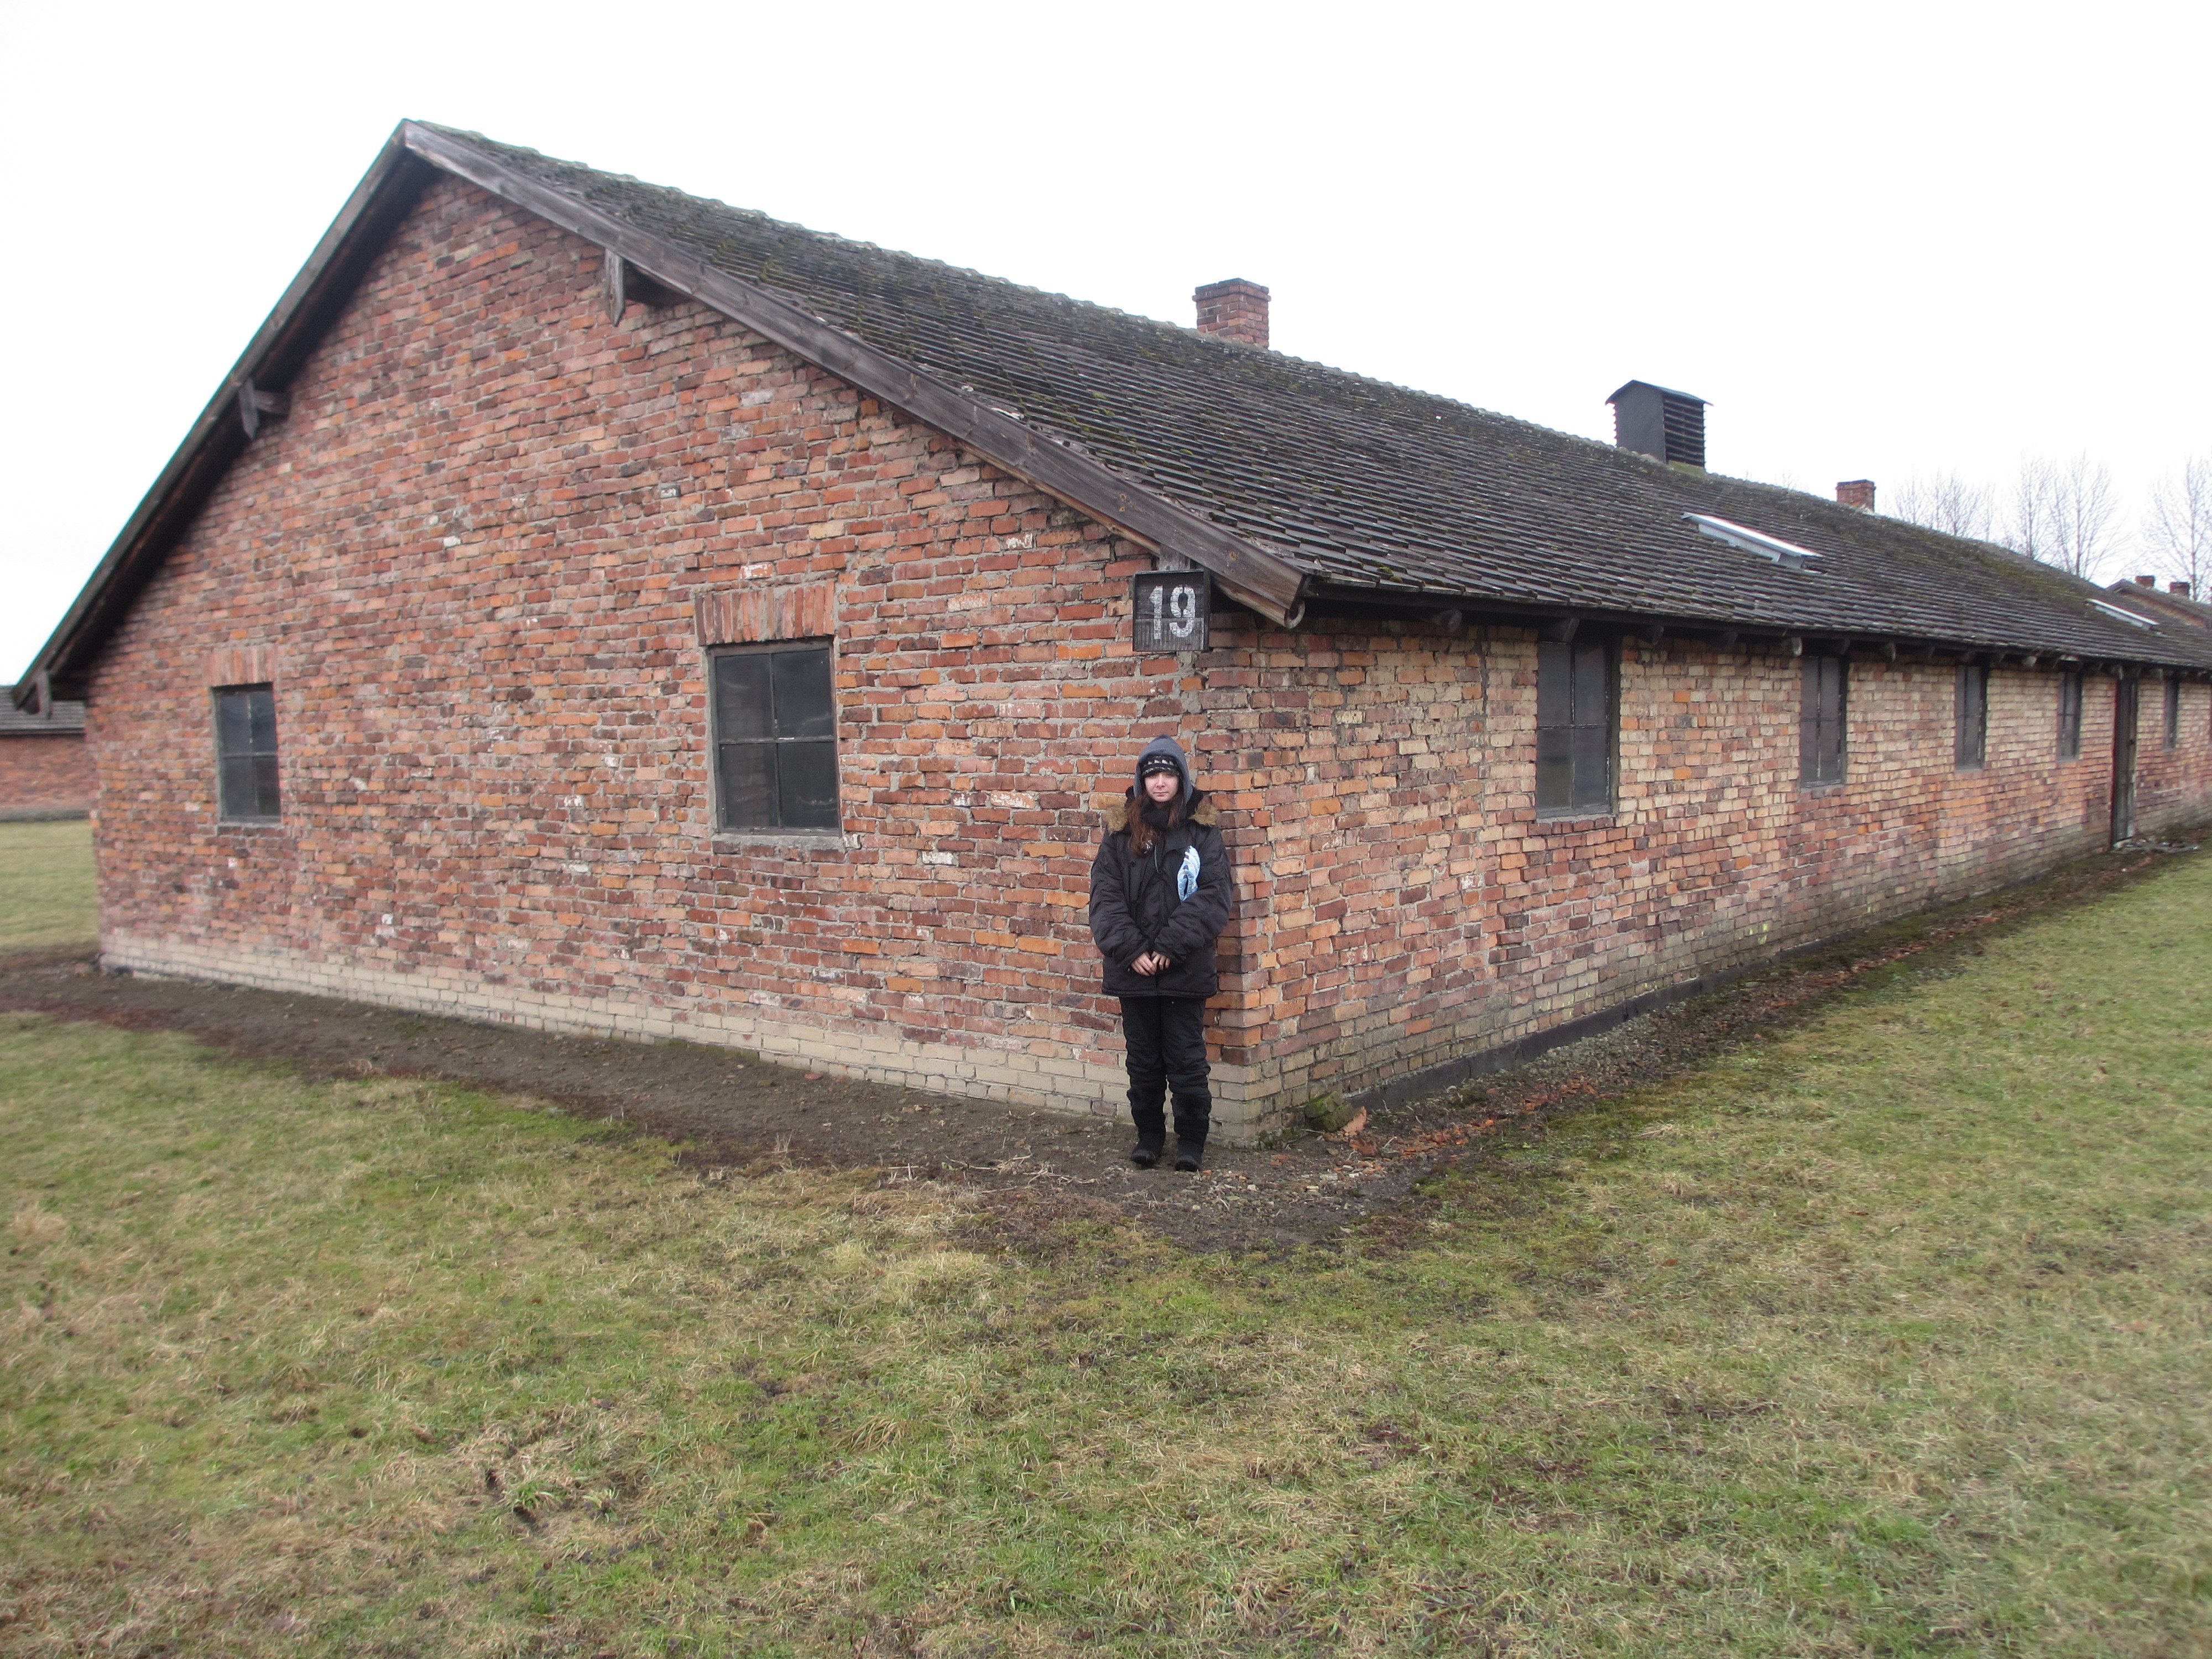 Elise Kolender, Jeffrey's daughter and Pincus' granddaughter, in front of another of the Auschwitz barracks - 2013